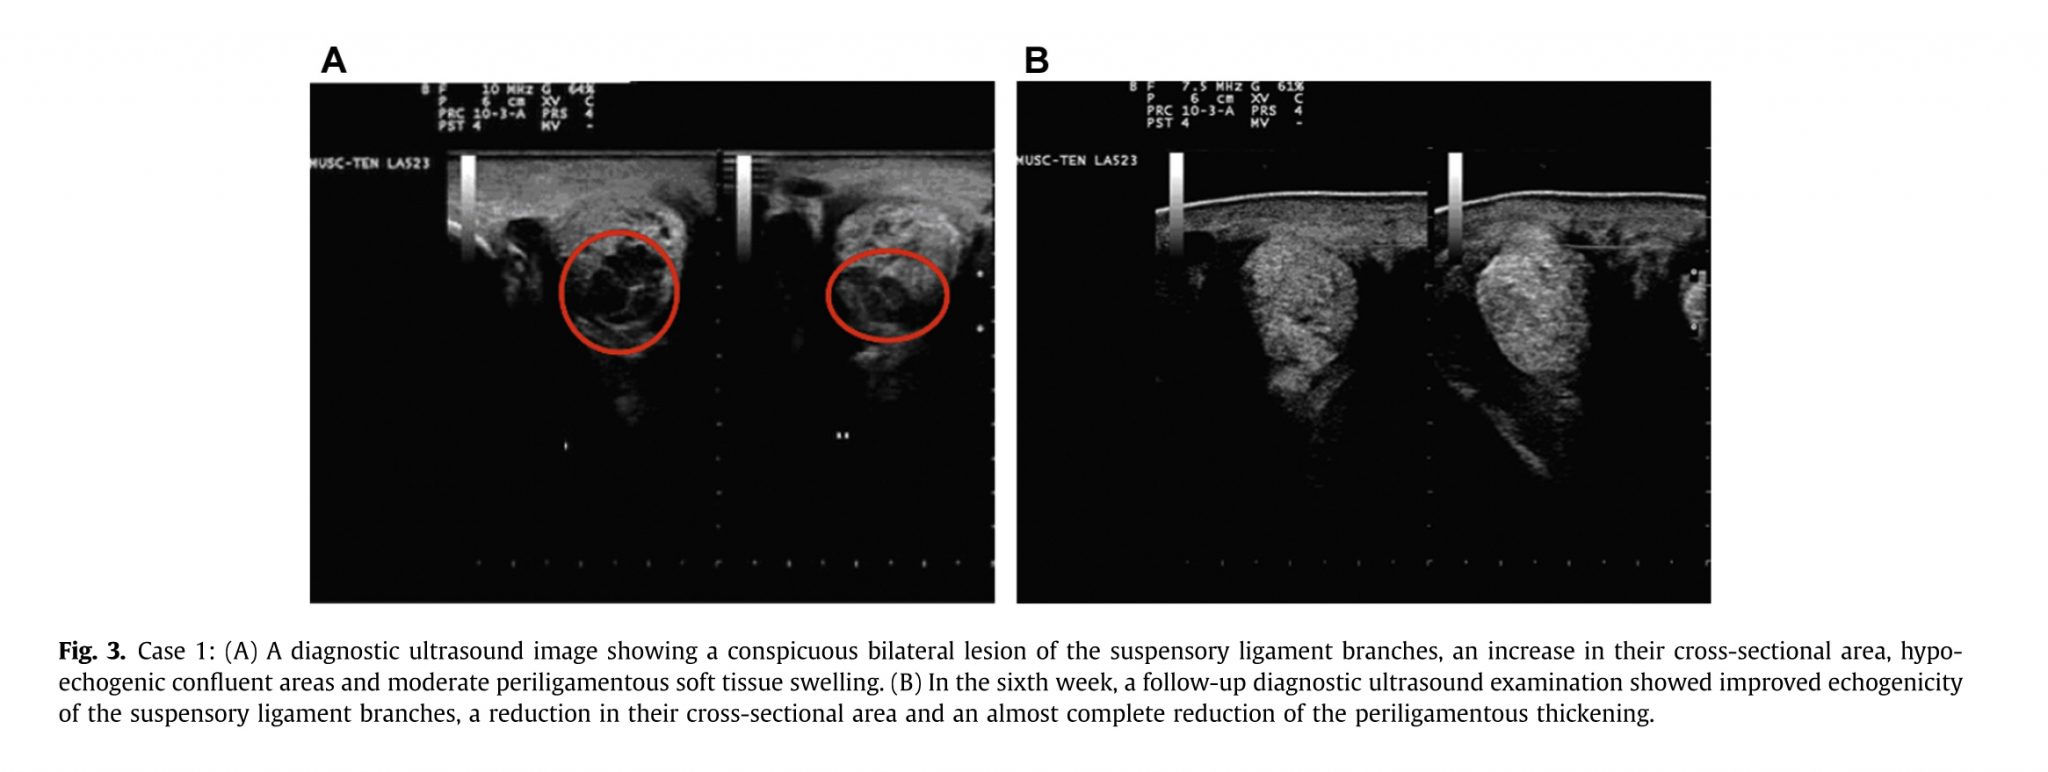 Assessment of Noninvasive Low-Frequency Ultrasound Therapy - Ultrasound Images 3